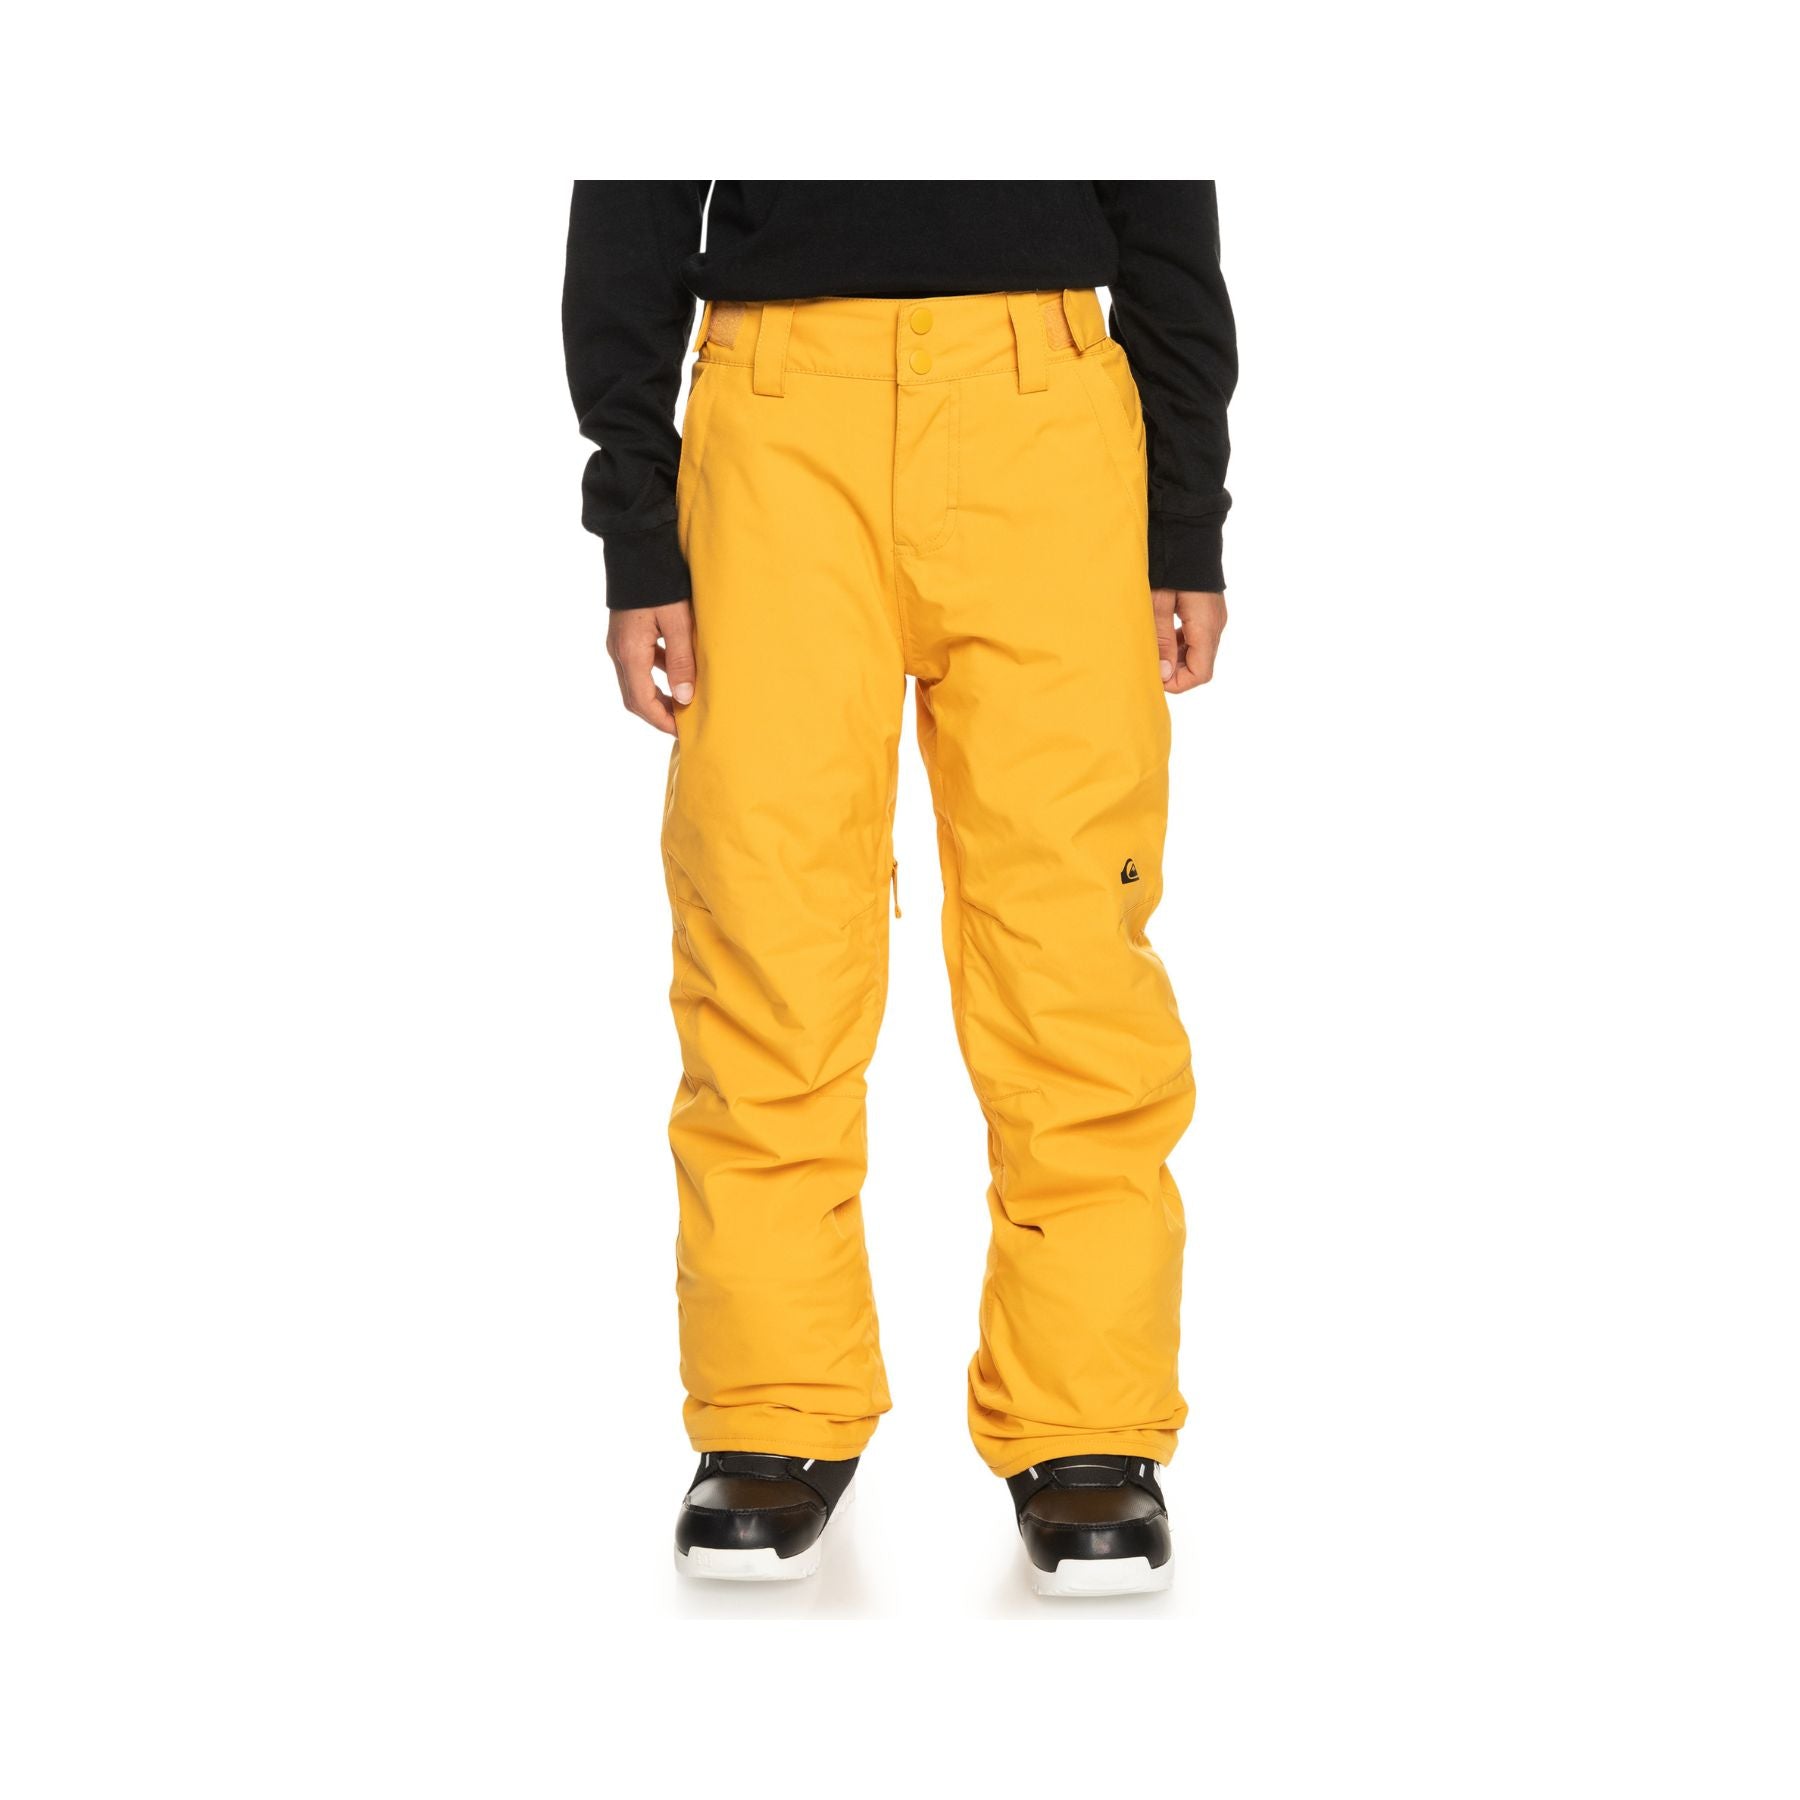 Quiksilver Estate Youth Pant in Mineral Yellow